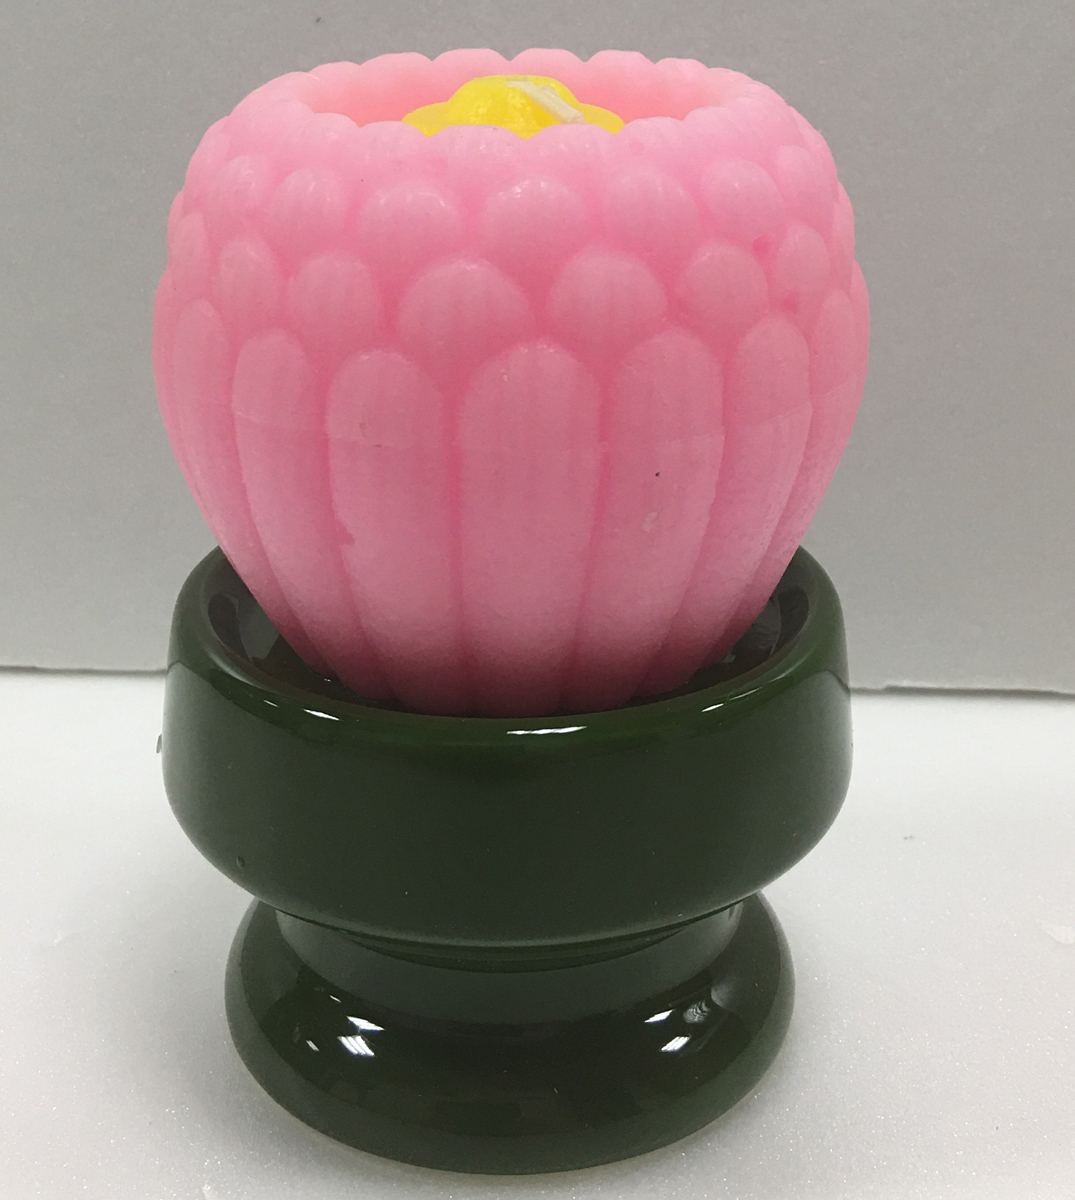  Buddhist altar fittings chrysanthemum pink ceramics pcs attaching burning hour approximately 20 hour low sok peach color candle candle made in Japan low sok family Buddhist altar 